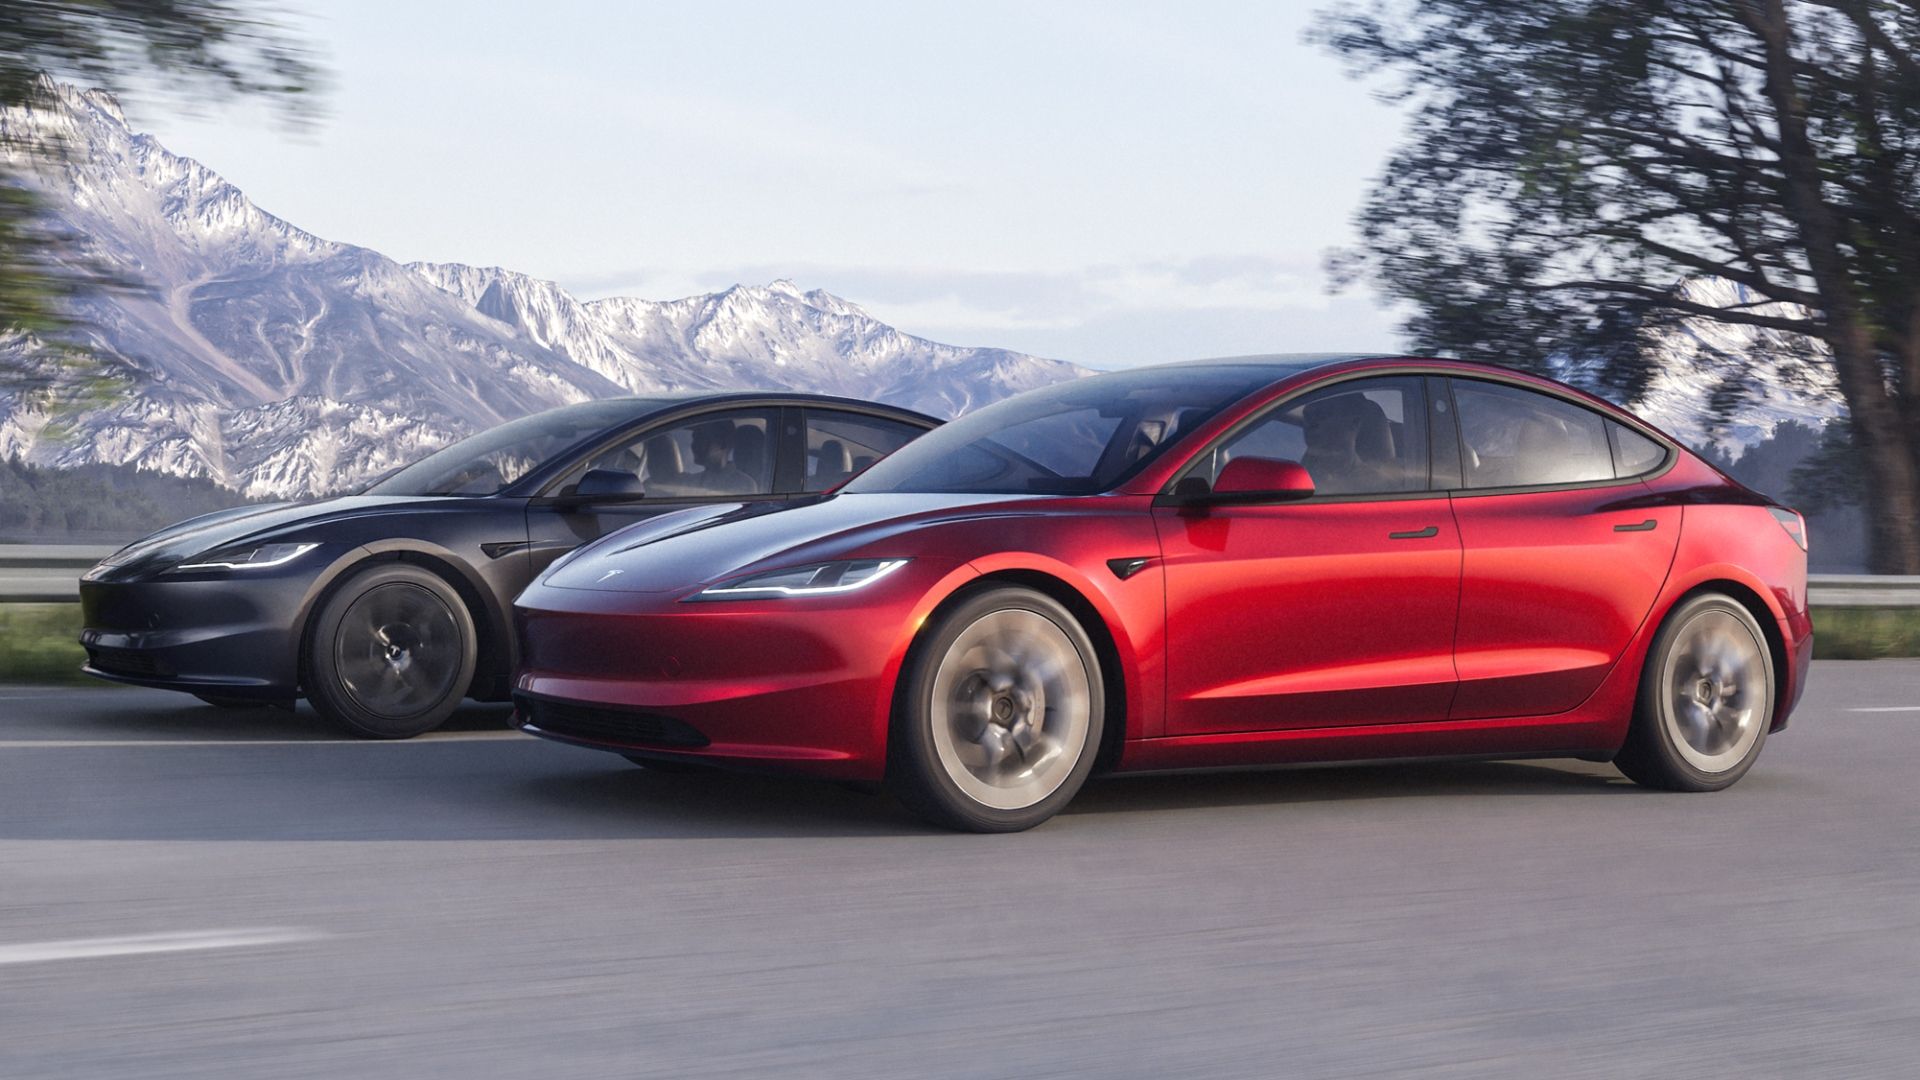 Gray and red Tesla Model 3 front-quarter driving